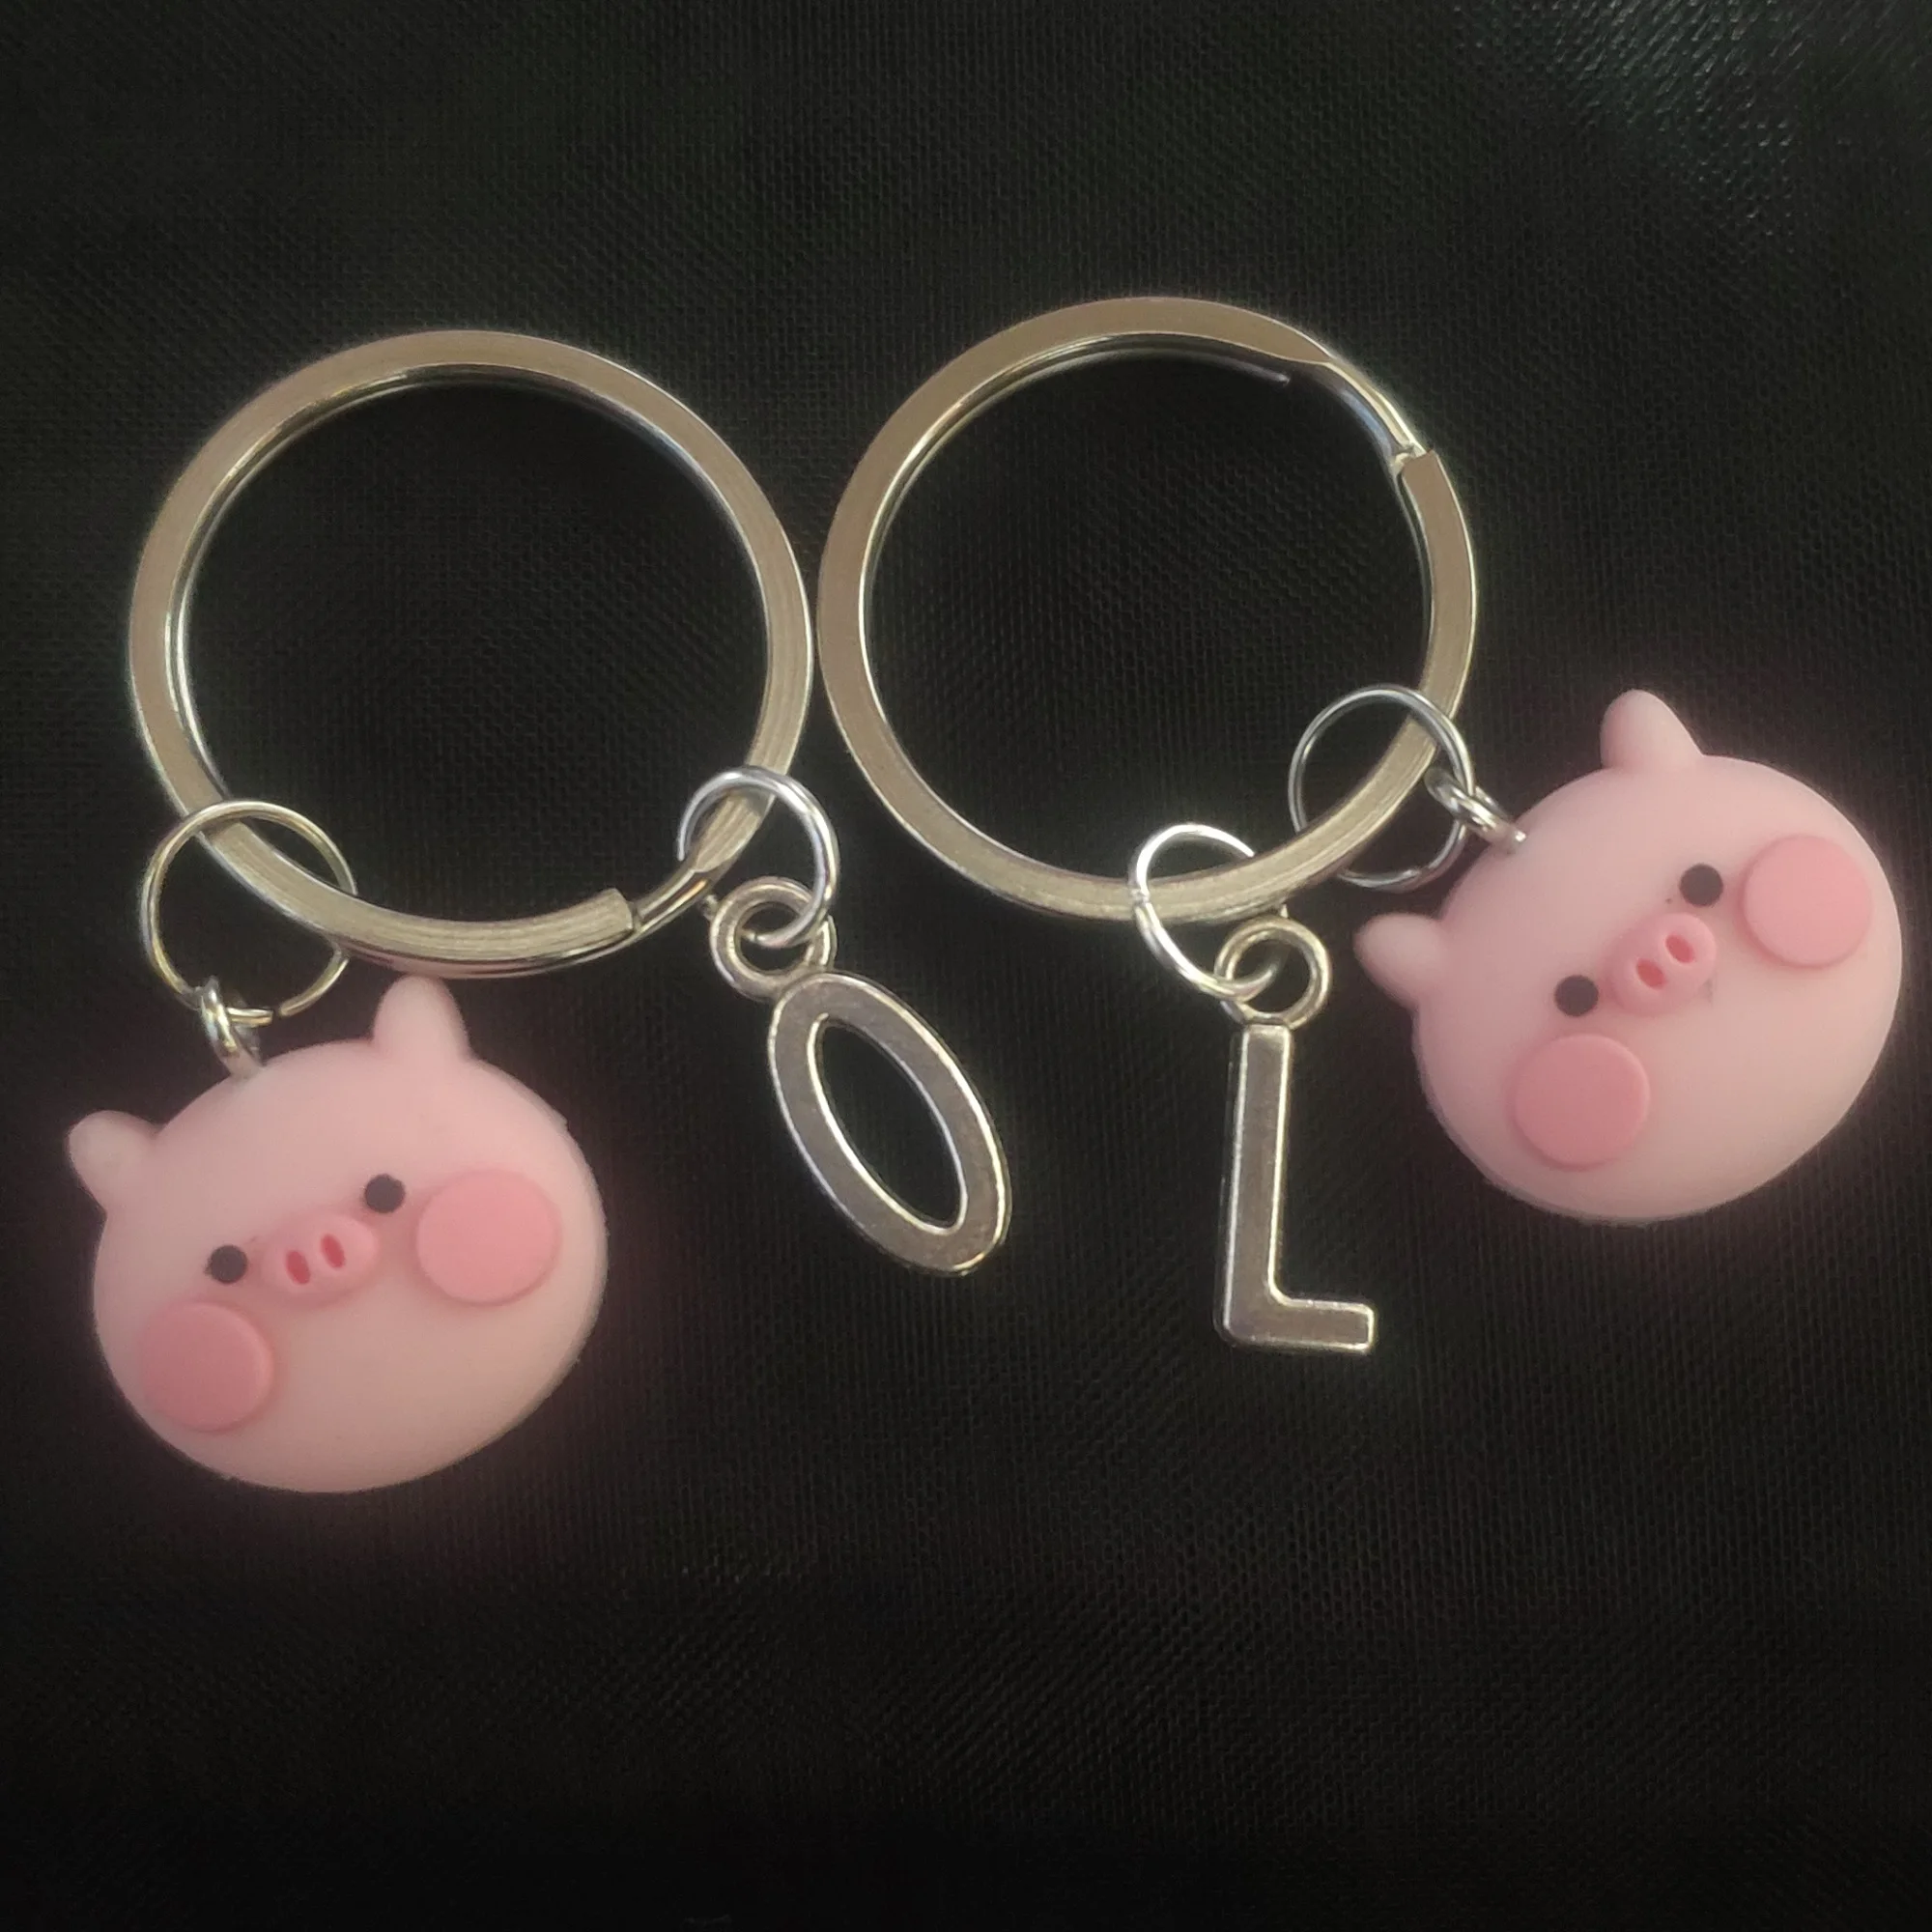 

1PC Cute Pink Pig Keychain Key Ring For Women Girl Animal Bag Key Chain Lovely Keychains Car Keyring Jewelry Gift